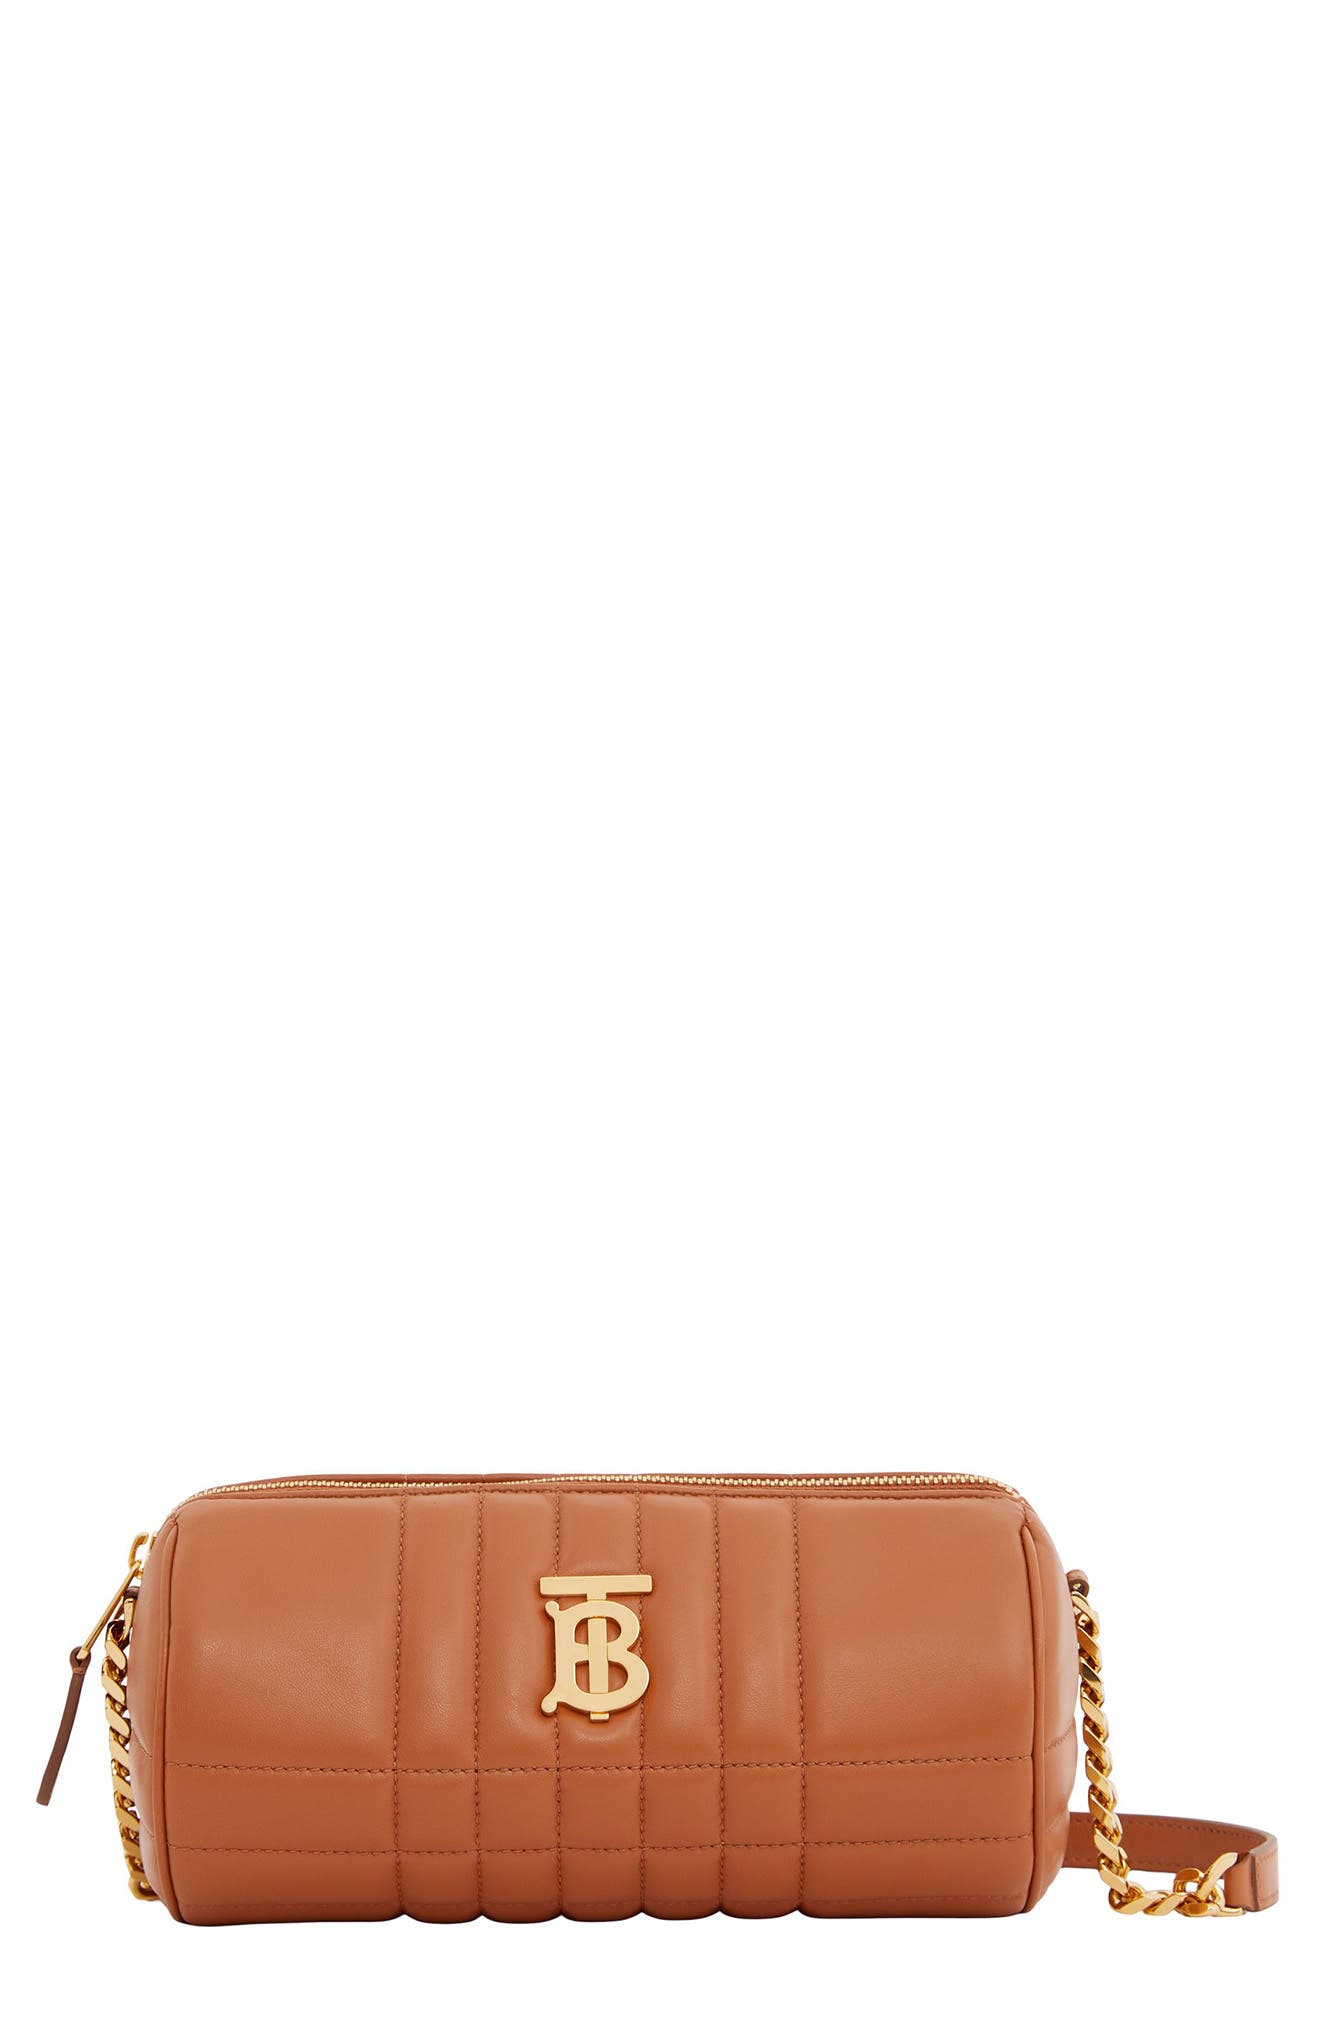 Burberry Lola Check Quilted Leather Barrel Crossbody Bag in Marple Brown at Nordstrom